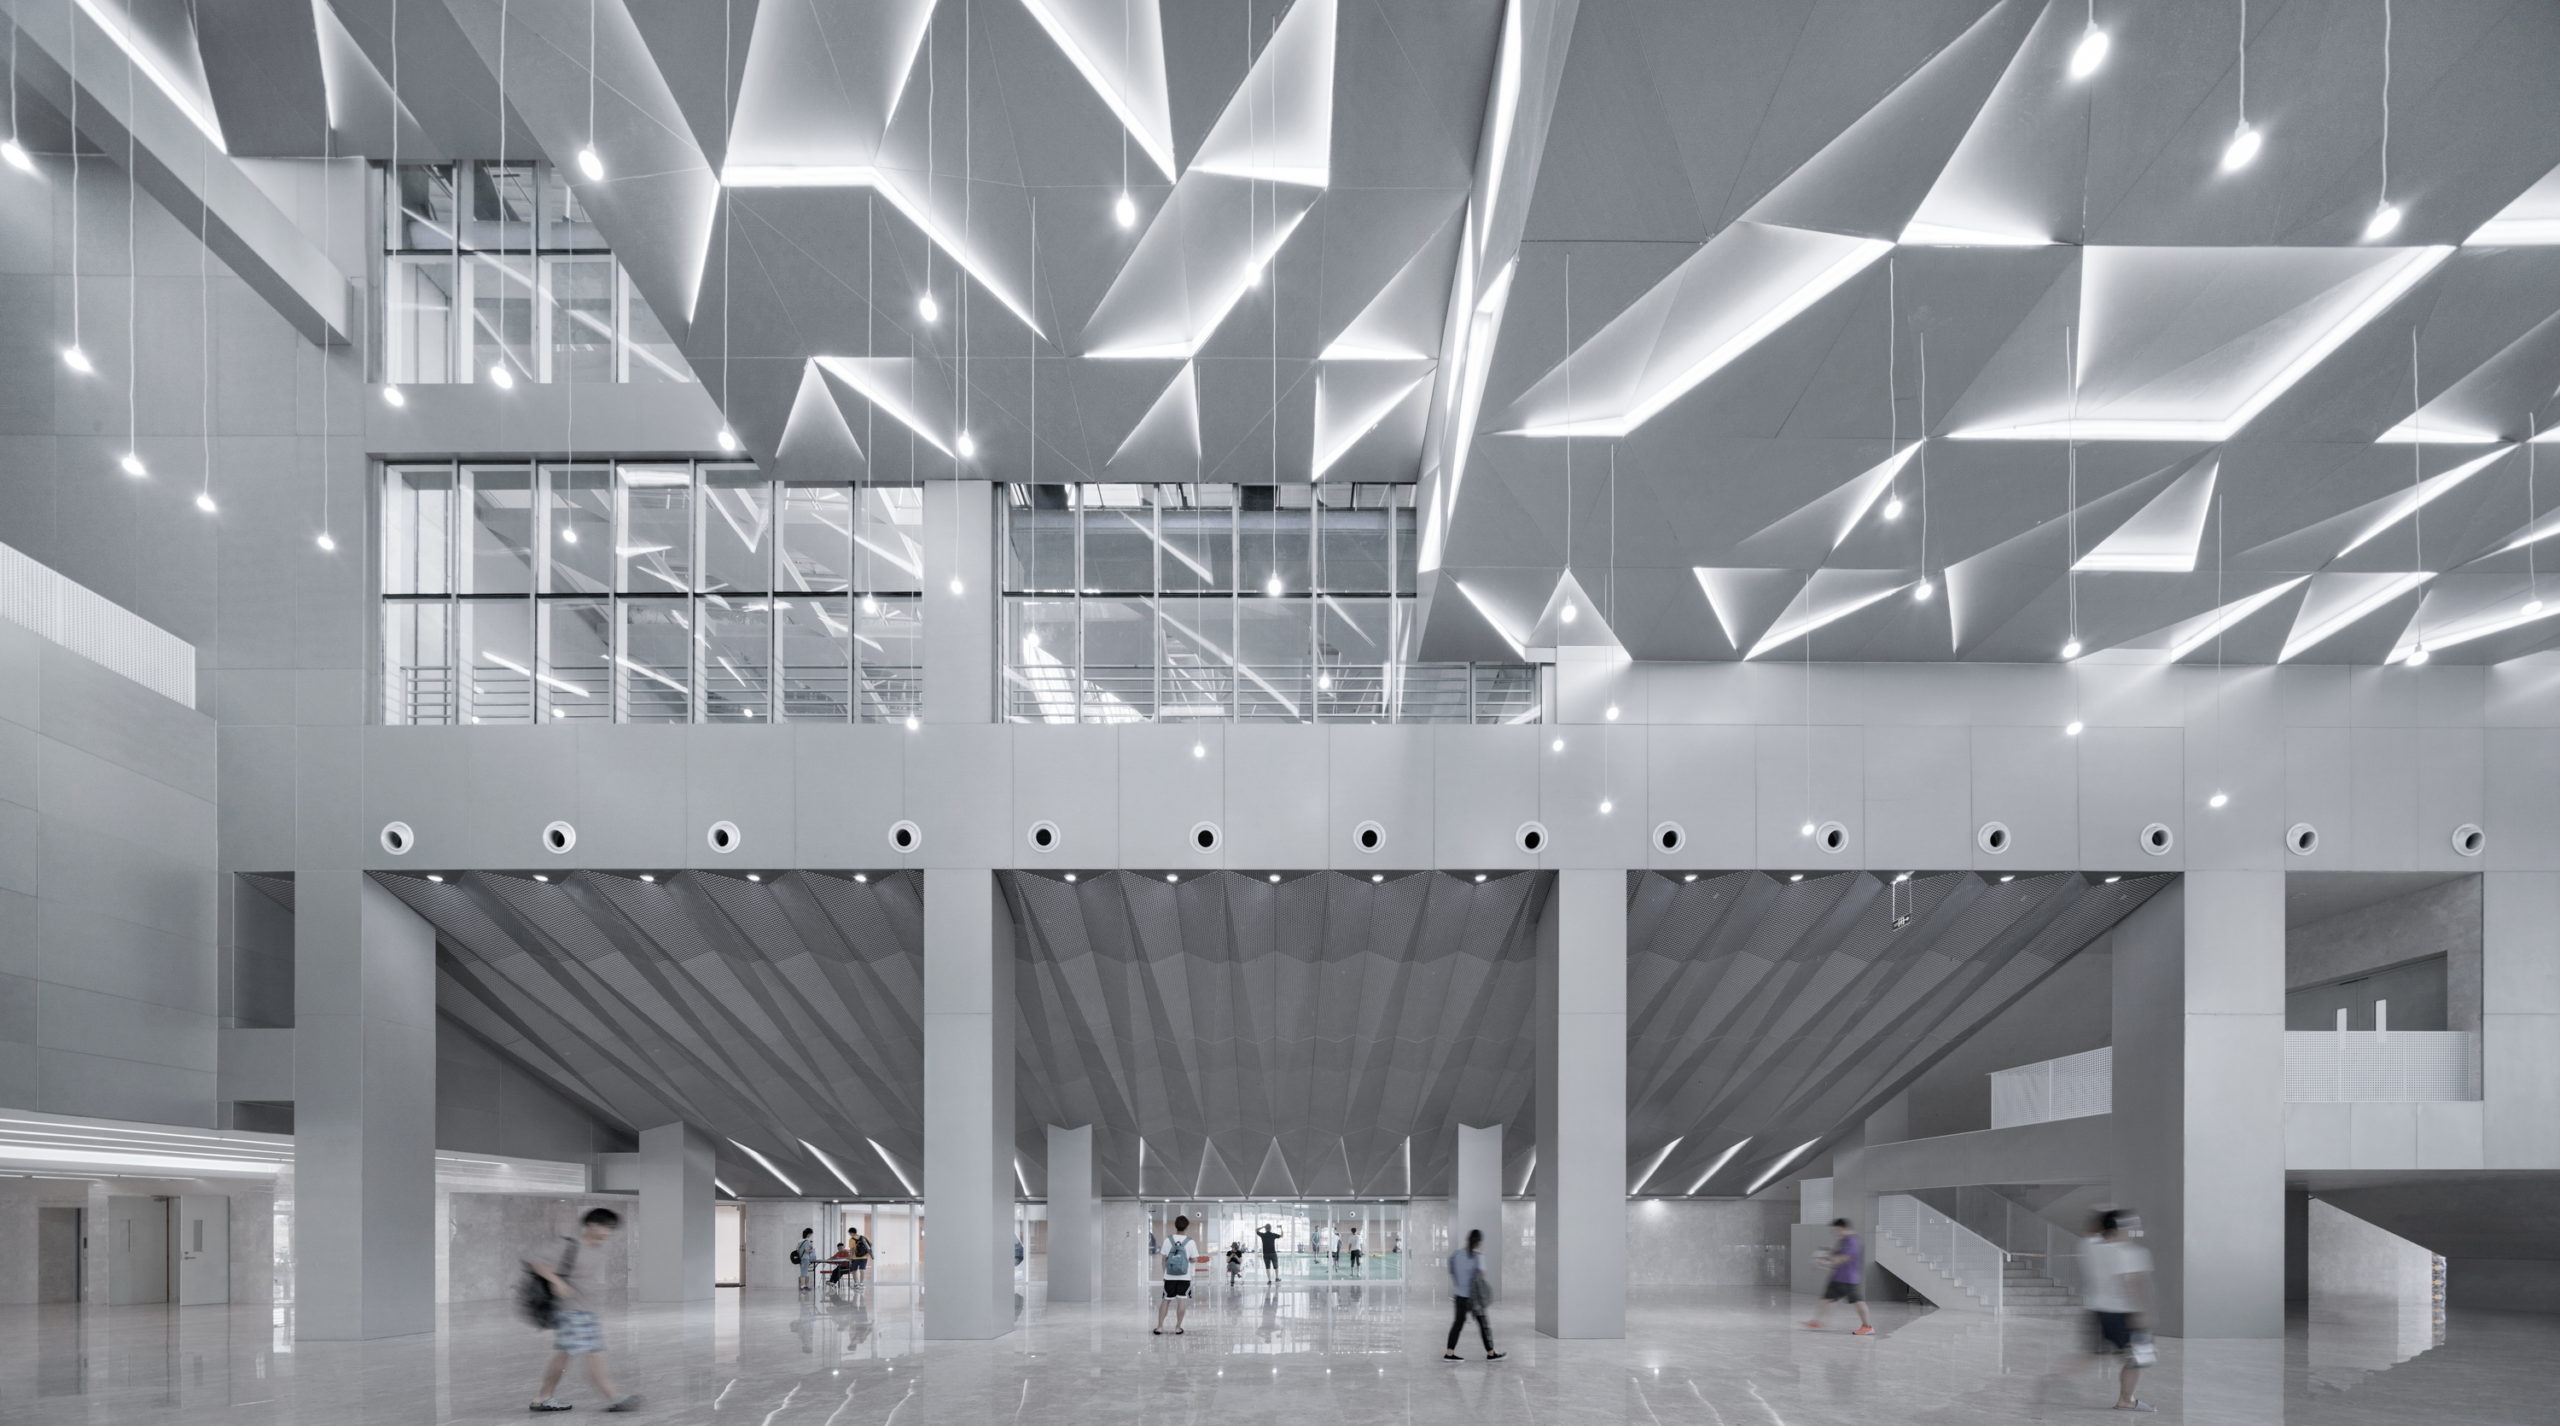 iconic stadiums BIT Sports Center by Atelier Alter Architects, Beijing, China